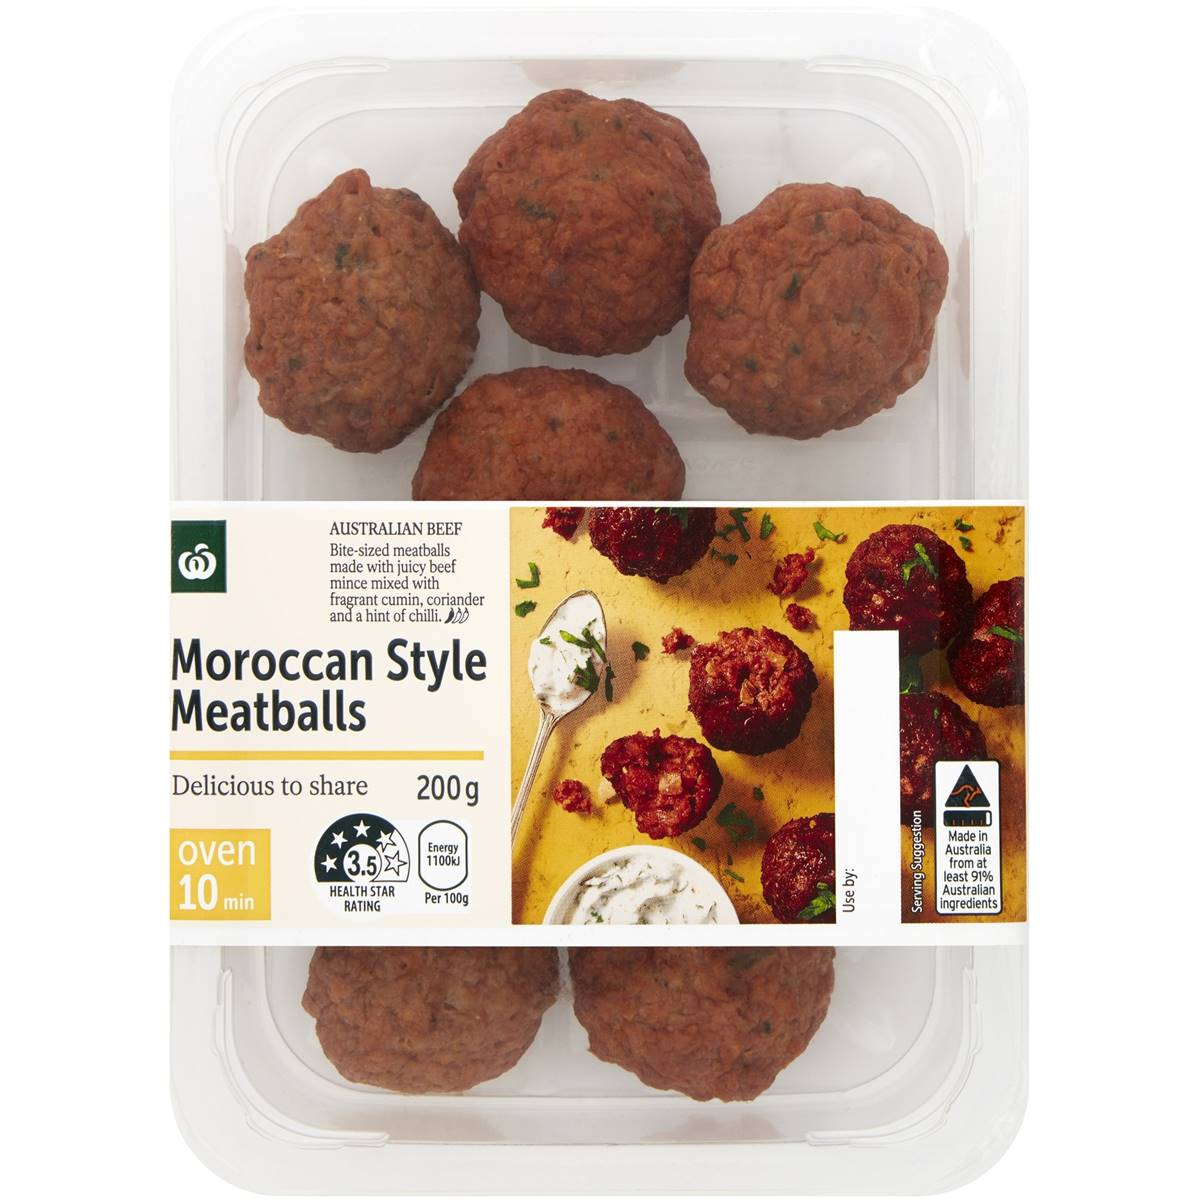 Calories in Woolworths Moroccan Style Meatballs